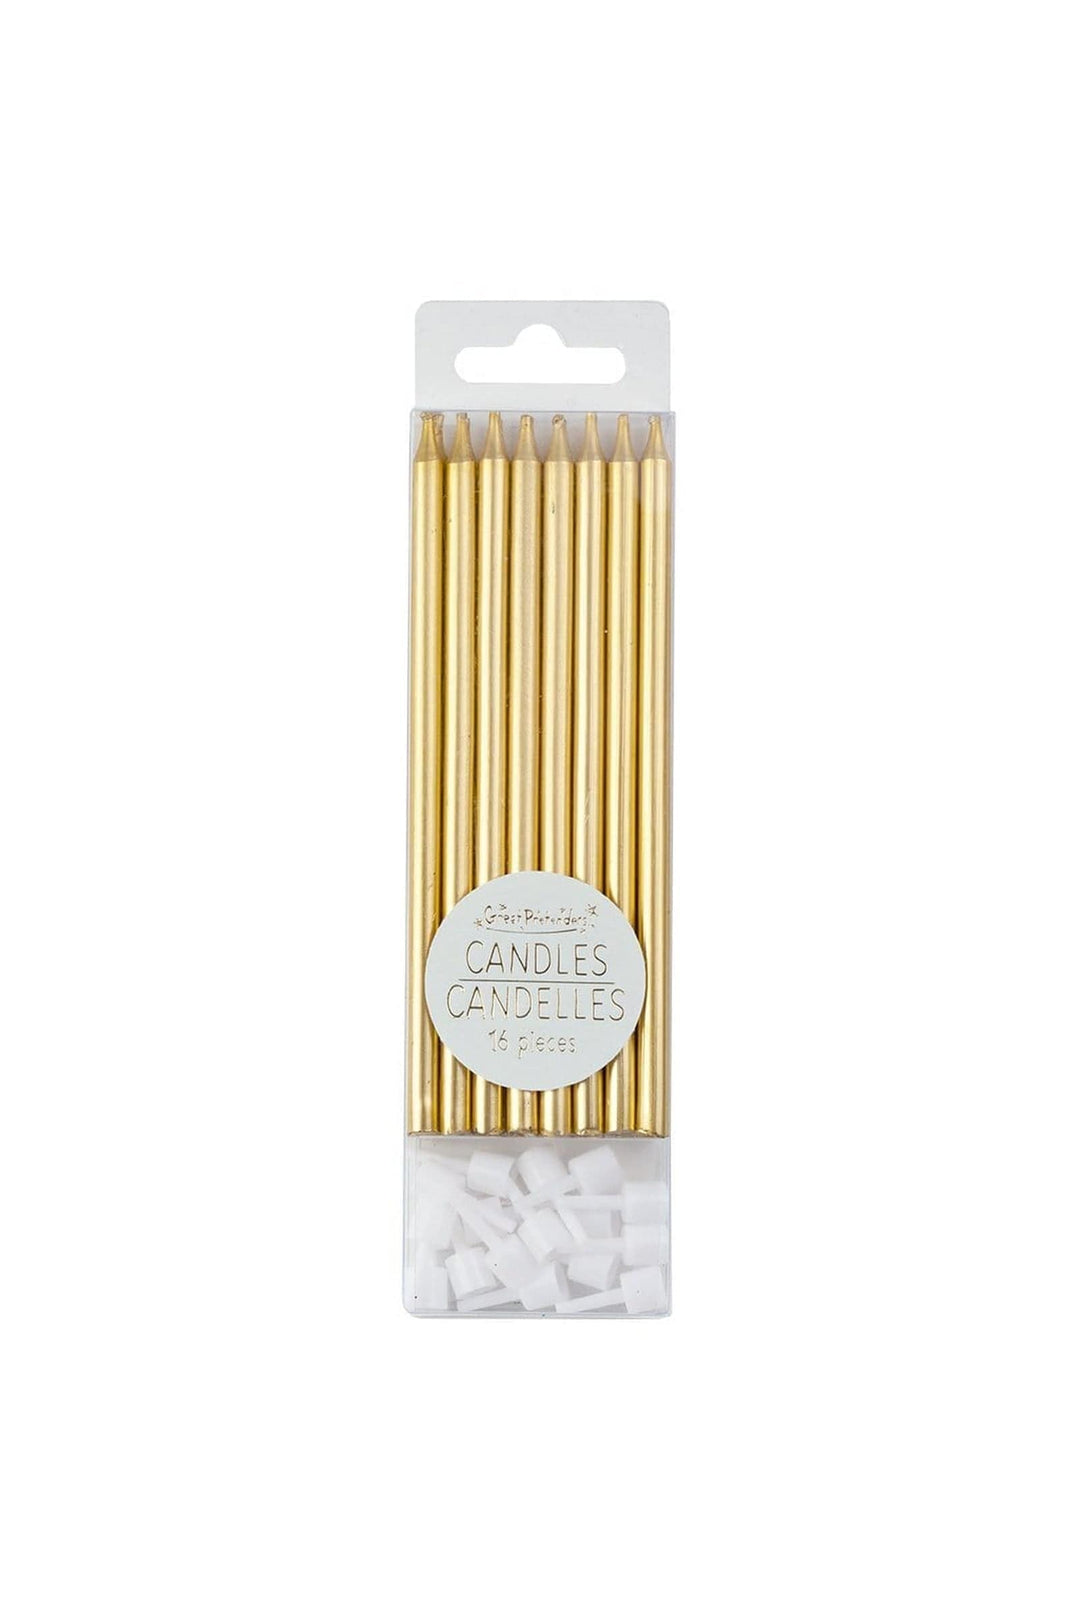 Great Pretenders Party Supplies Metallic Gold Candles